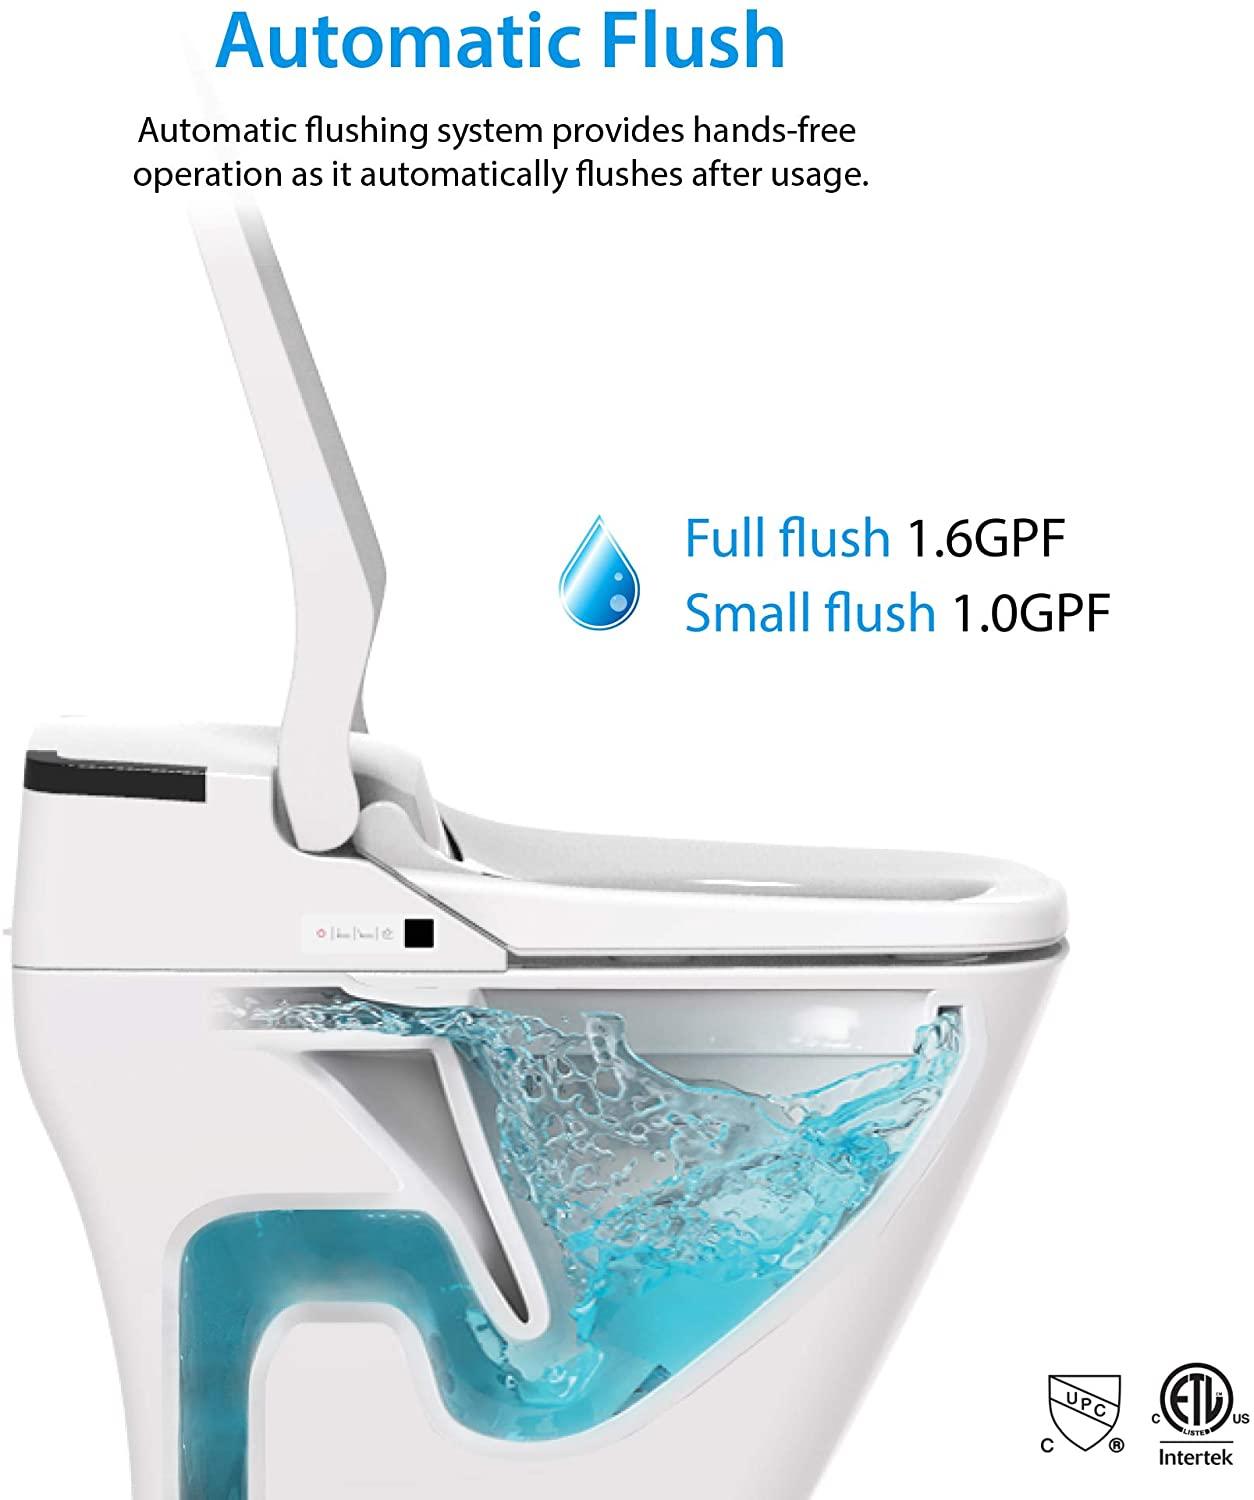 VOVO STYLEMENT TCB-090SA Bidet Toilet with Auto Open/Close Lid, Auto Dual Flush, Heated Seat, Warm Water and Dry, Made in Korea - YOURISHOP.COM